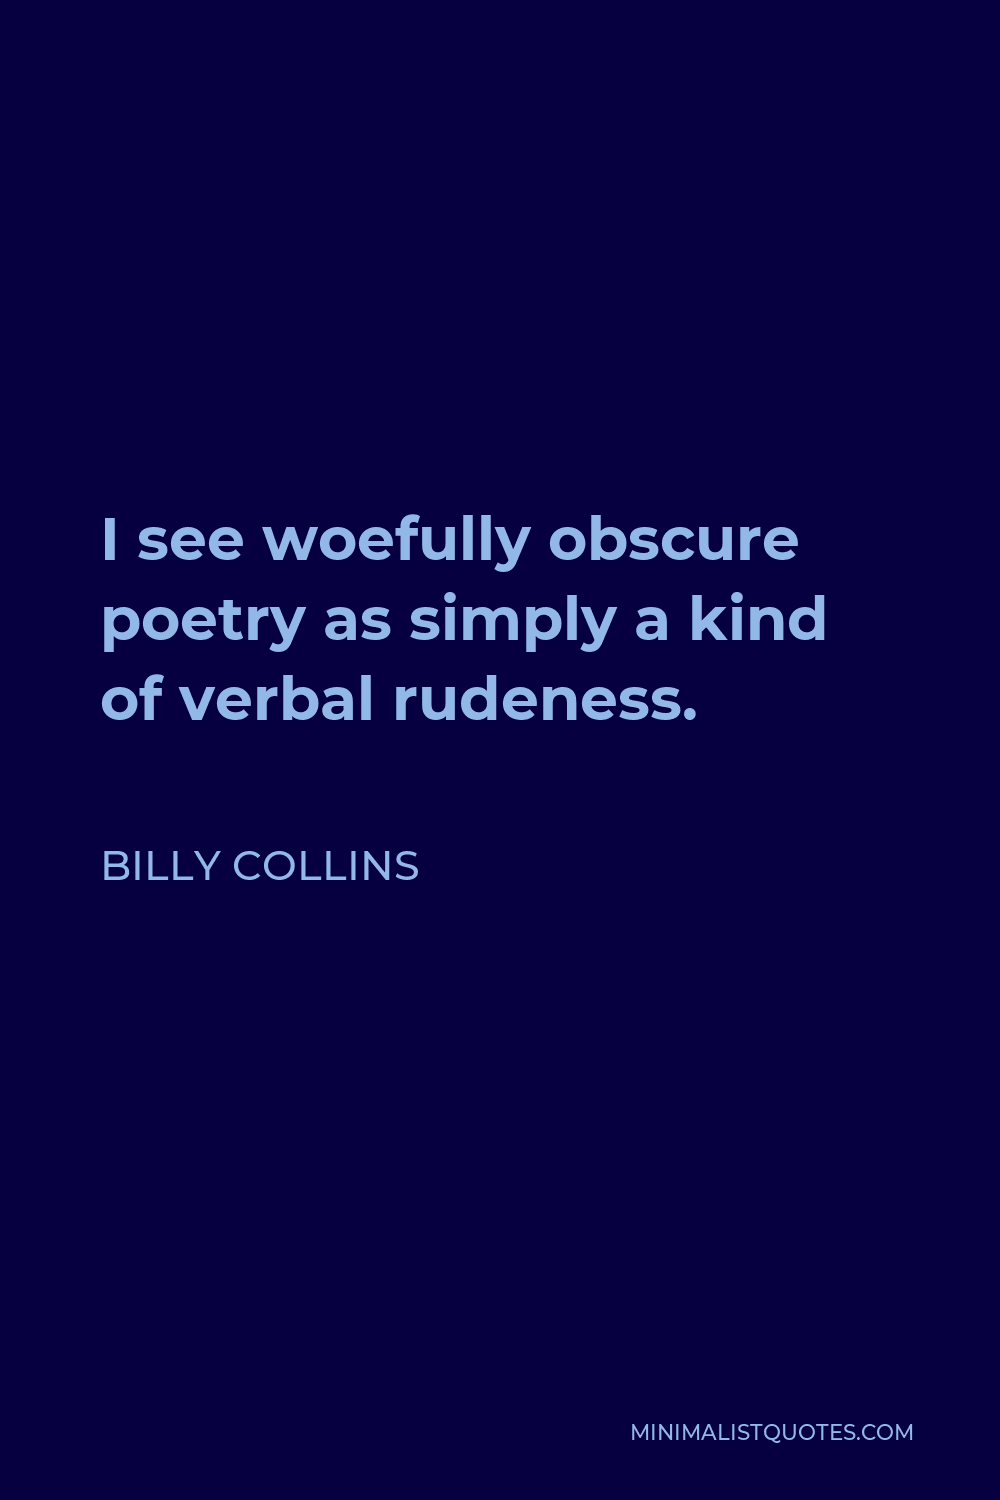 Billy Collins Quote - I see woefully obscure poetry as simply a kind of verbal rudeness.